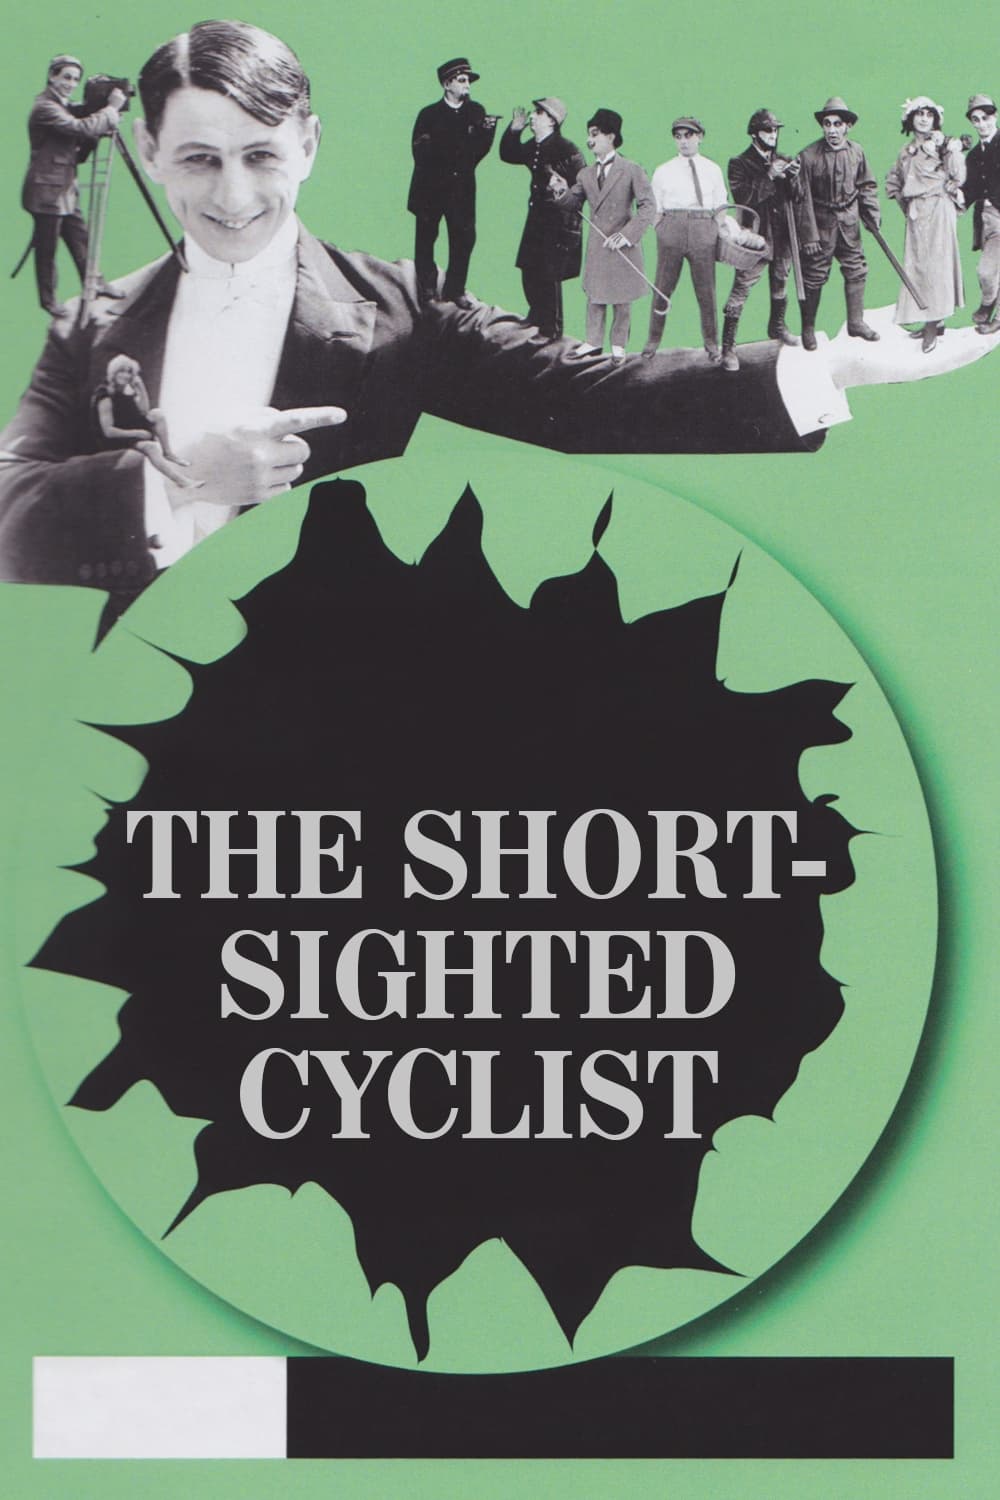 The Short-Sighted Cyclist